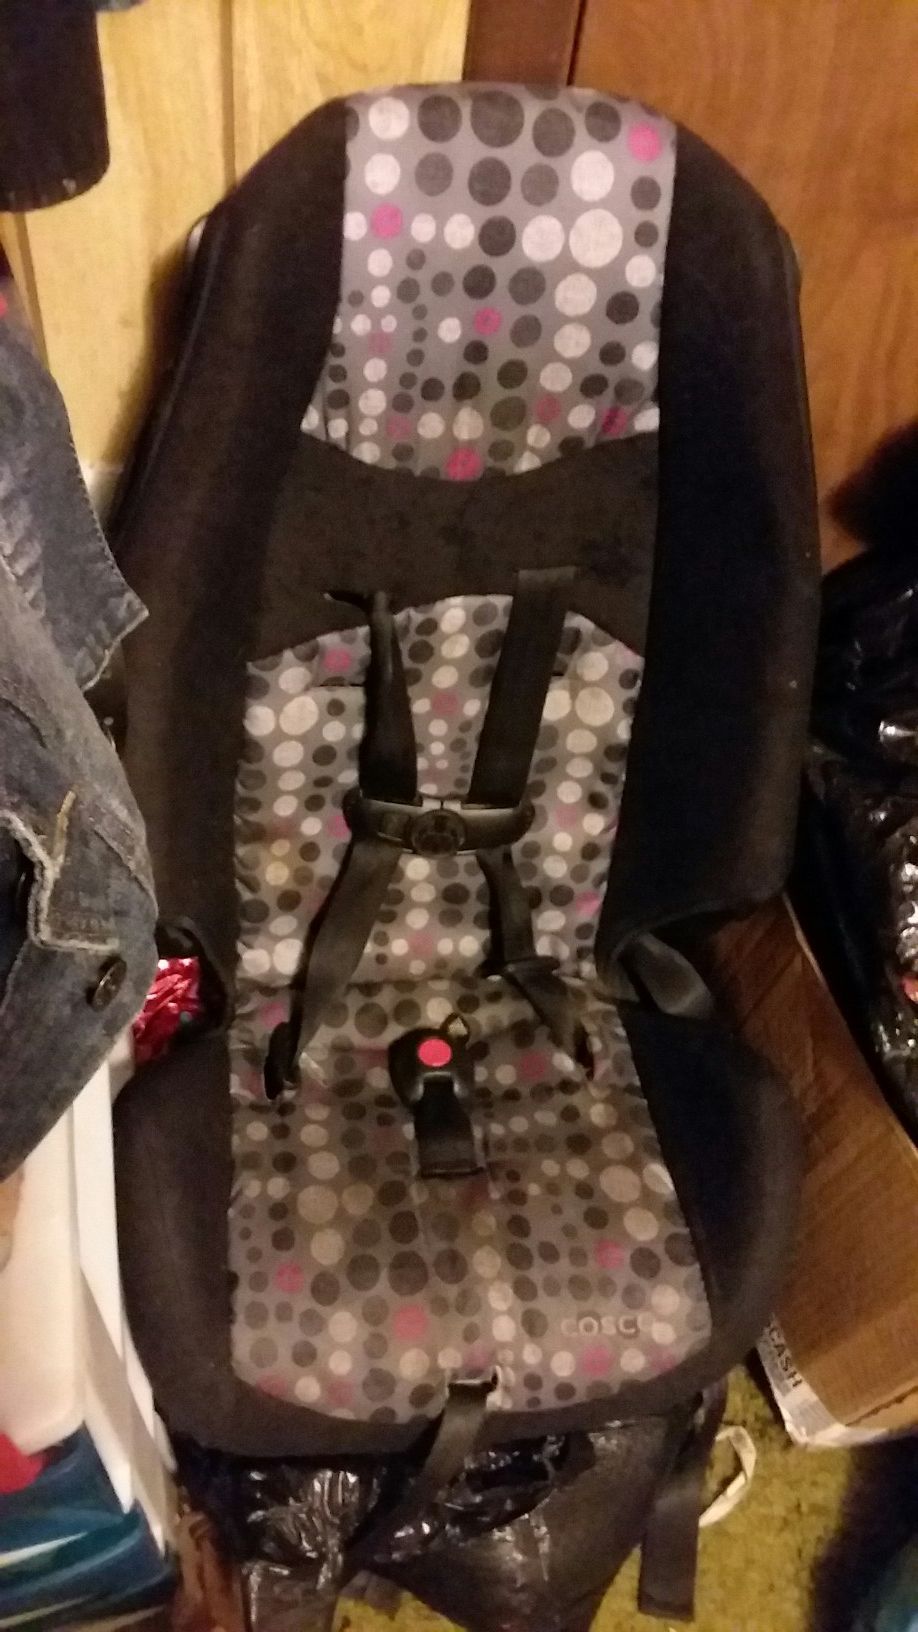 Toddler car seat . Price is negotiable.